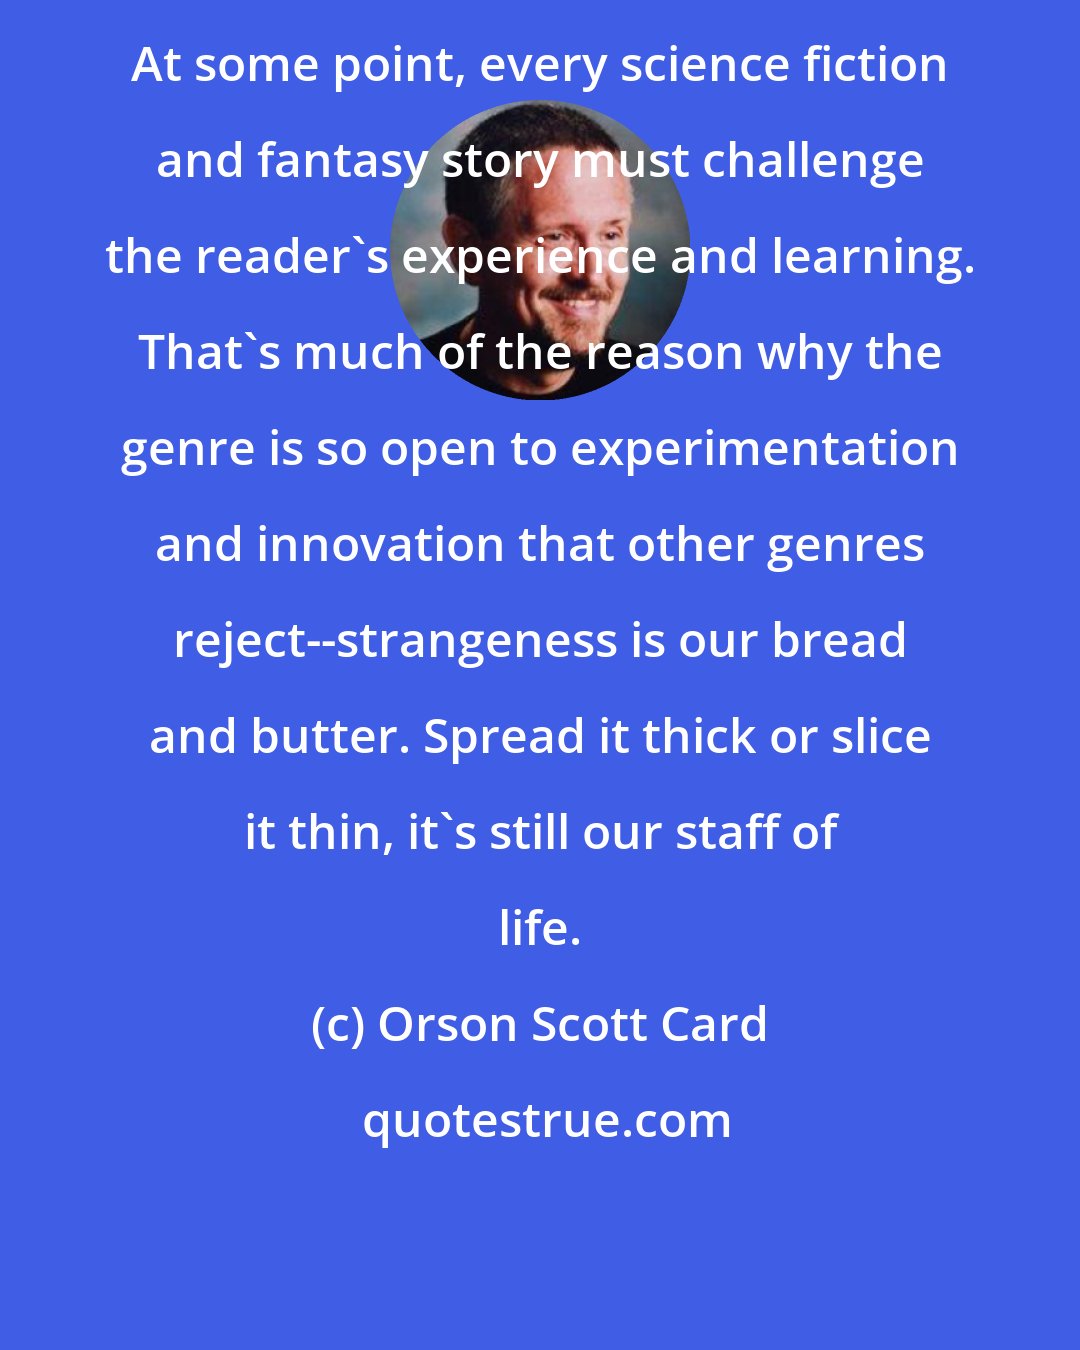 Orson Scott Card: At some point, every science fiction and fantasy story must challenge the reader's experience and learning. That's much of the reason why the genre is so open to experimentation and innovation that other genres reject--strangeness is our bread and butter. Spread it thick or slice it thin, it's still our staff of life.